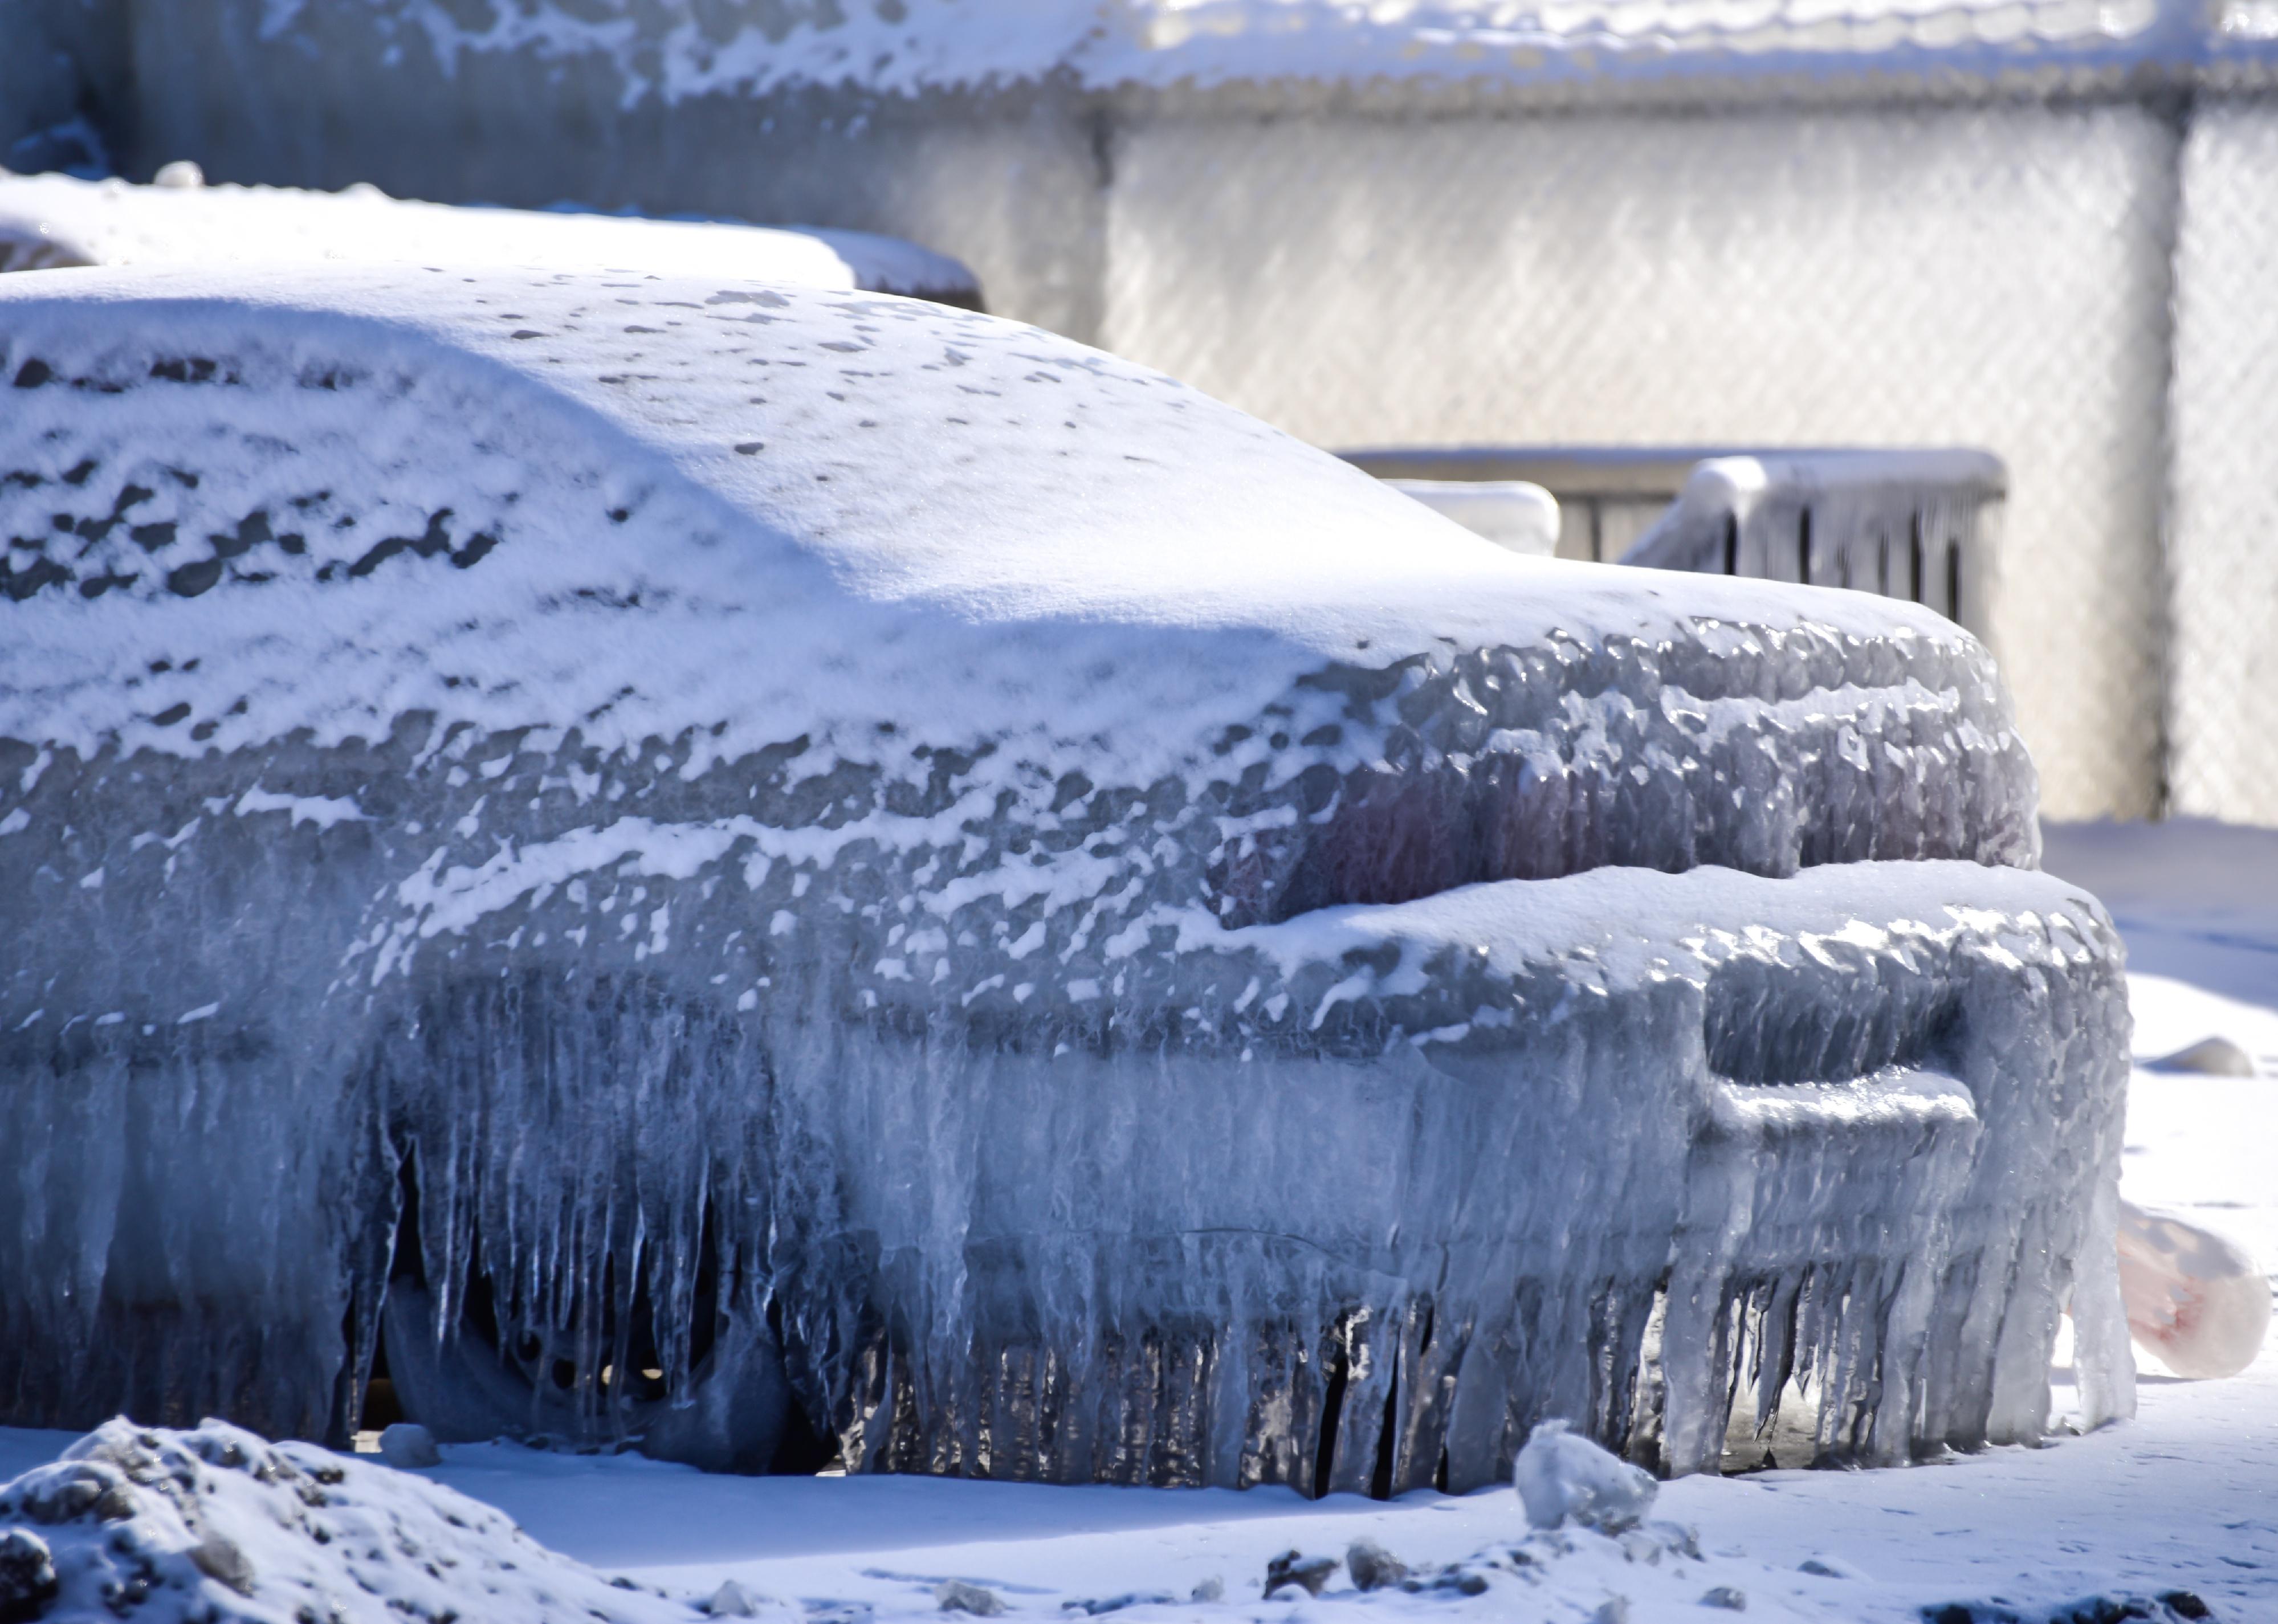 Ice forming on car in winter.